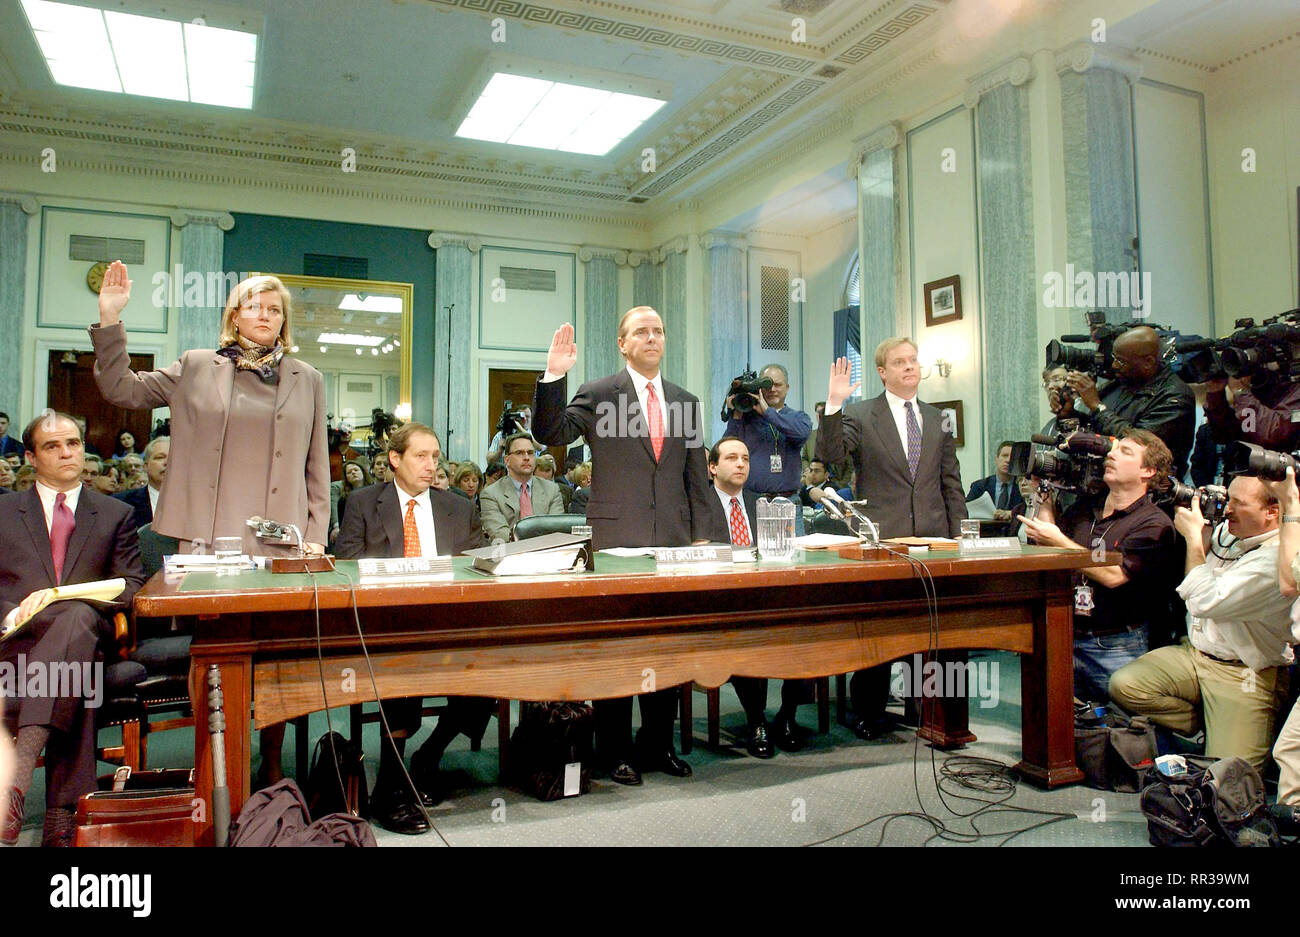 Washington, D.C. - February 26, 2002 --  Sherron Watkins, Jeffrey Skilling, and Jeffrey McMahon are sworn to testify before the United States Senate Commerce, Science and Transportation Committee to examine certain issues with respect to the collapse of Enron Corporation..Credit: Ron Sachs / CNP /MediaPunch Stock Photo